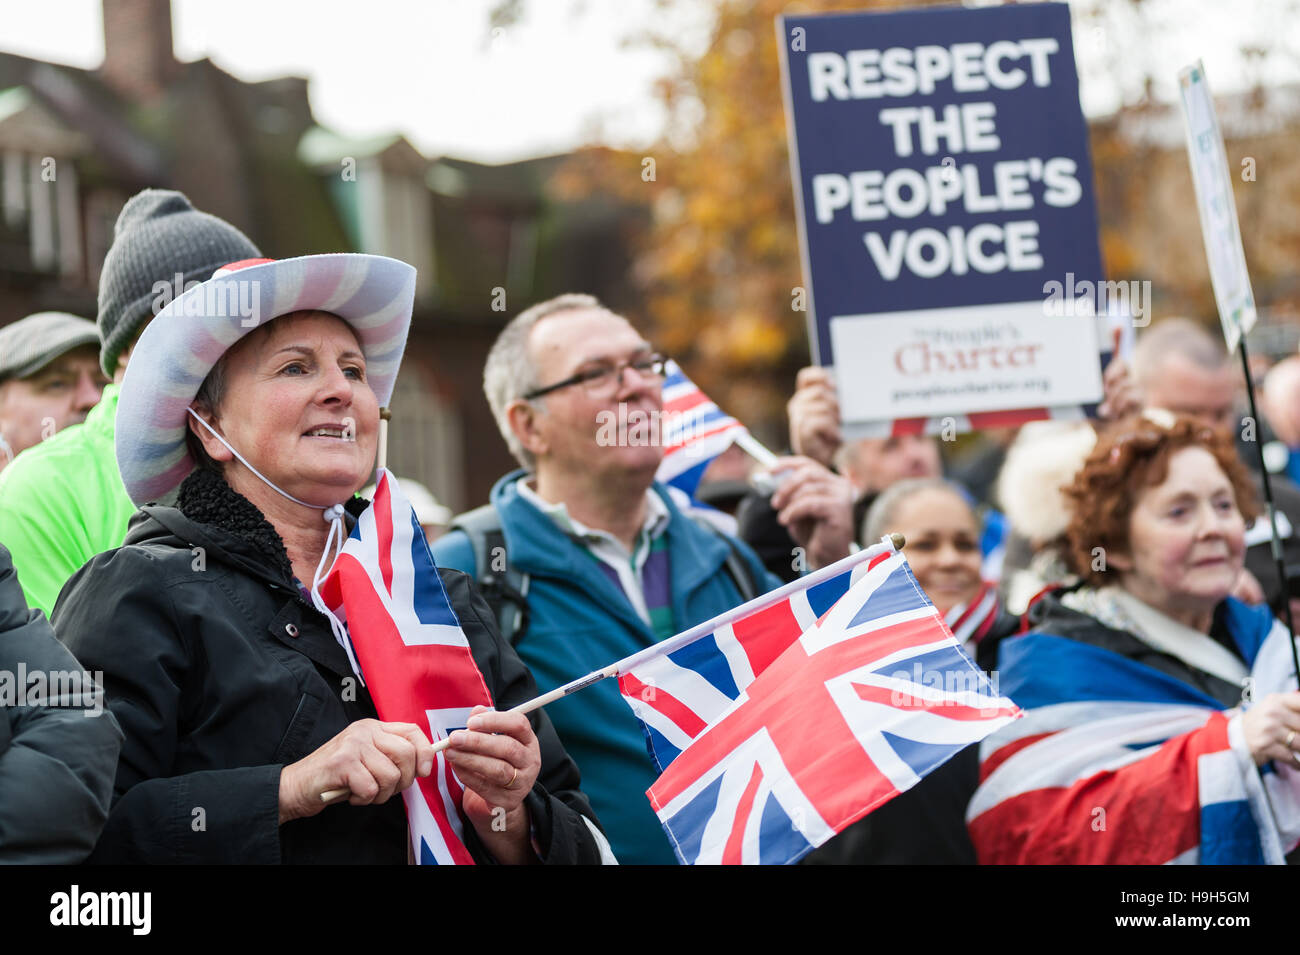 London, UK. 23rd November 2016. Hundreds of pro-Brexit supporters gather to demonstrate outside Houses of Parliament on the day of the Autumn Statement. The main focus of the protest was to demand immediate triggering of Article 50 by the Prime Minister Theresa May and to oppose the recent High Court ruling to give MPs the final decision on the matter. The protesters call on the judges, government and MPs to respect and act on the result of the EU referendum where 52% voted to leave the European Union. Wiktor Szymanowicz/Alamy Live News Stock Photo